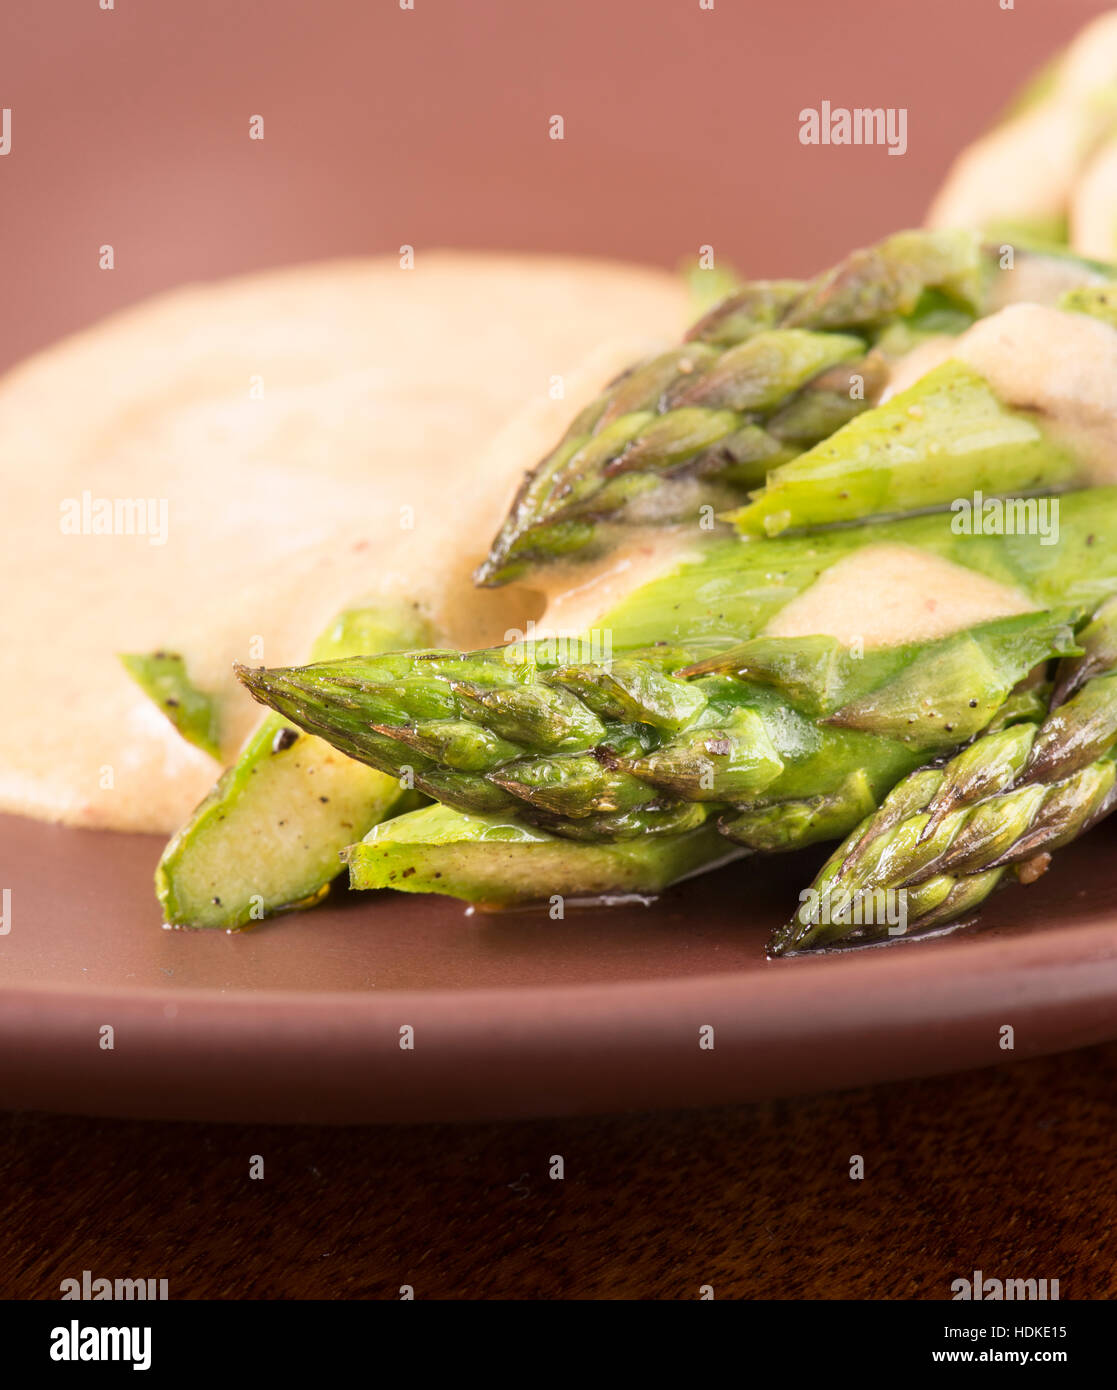 Fried green asparagus and sauce on plate in close up. Stock Photo